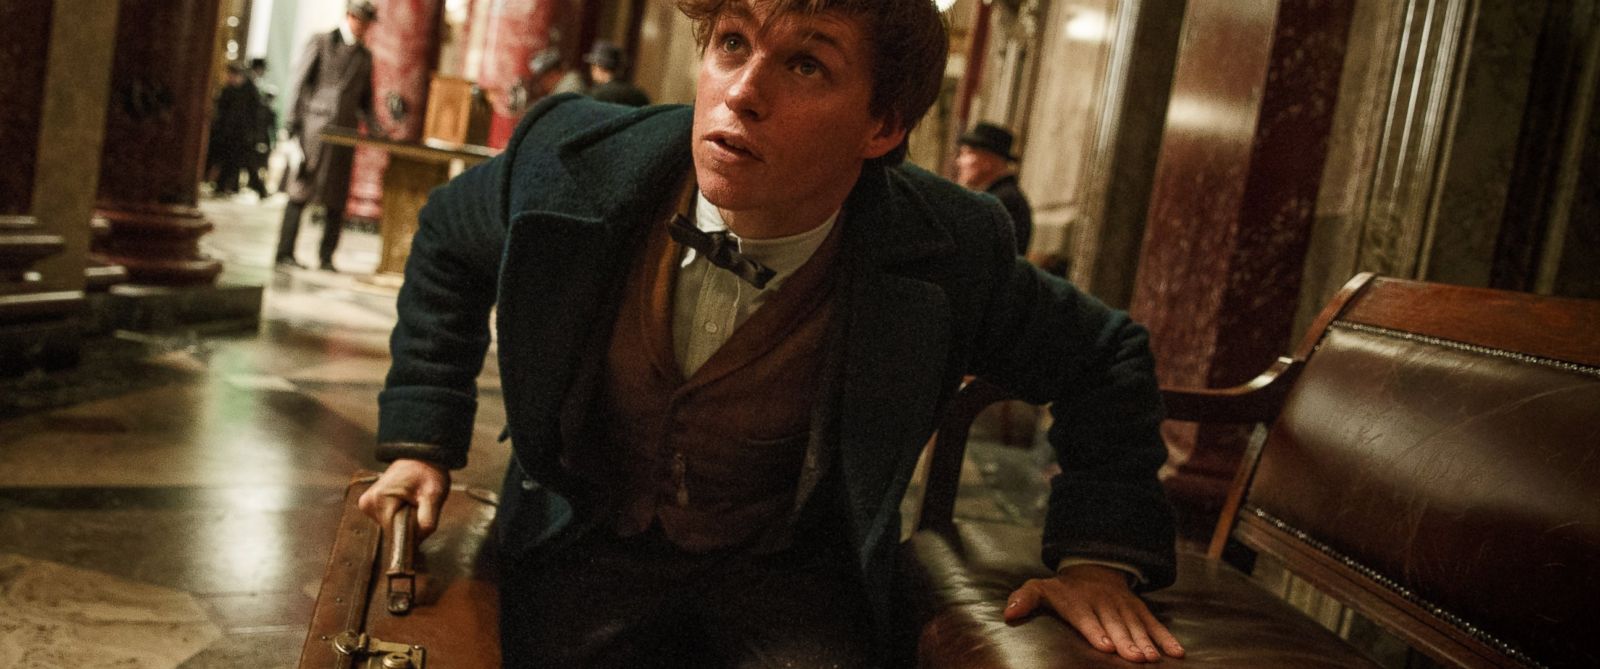 Movie Fantastic Beasts And Where To Find Them Online Watch 2016